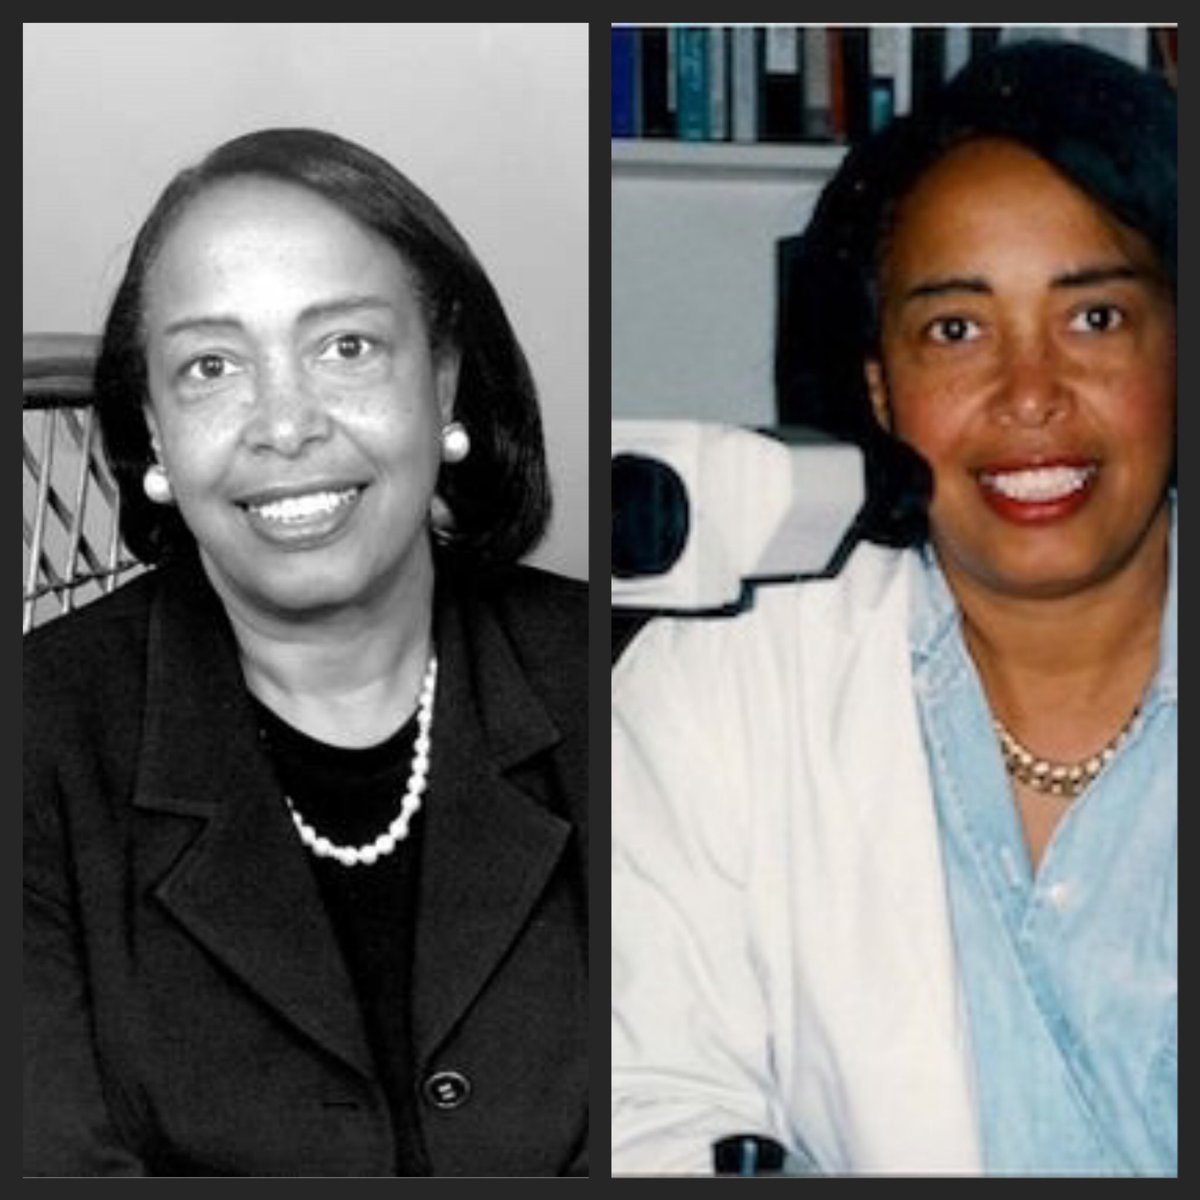 Dr. Patricia Era Bath was an African American ophthalmologist. She was the inventor of laser cataract surgery. The tool that she invented to conduct this procedure is called the Lazerphaco probe. She was a graduate of Howard University College of Medicine.  #BlackHistoryMonth  